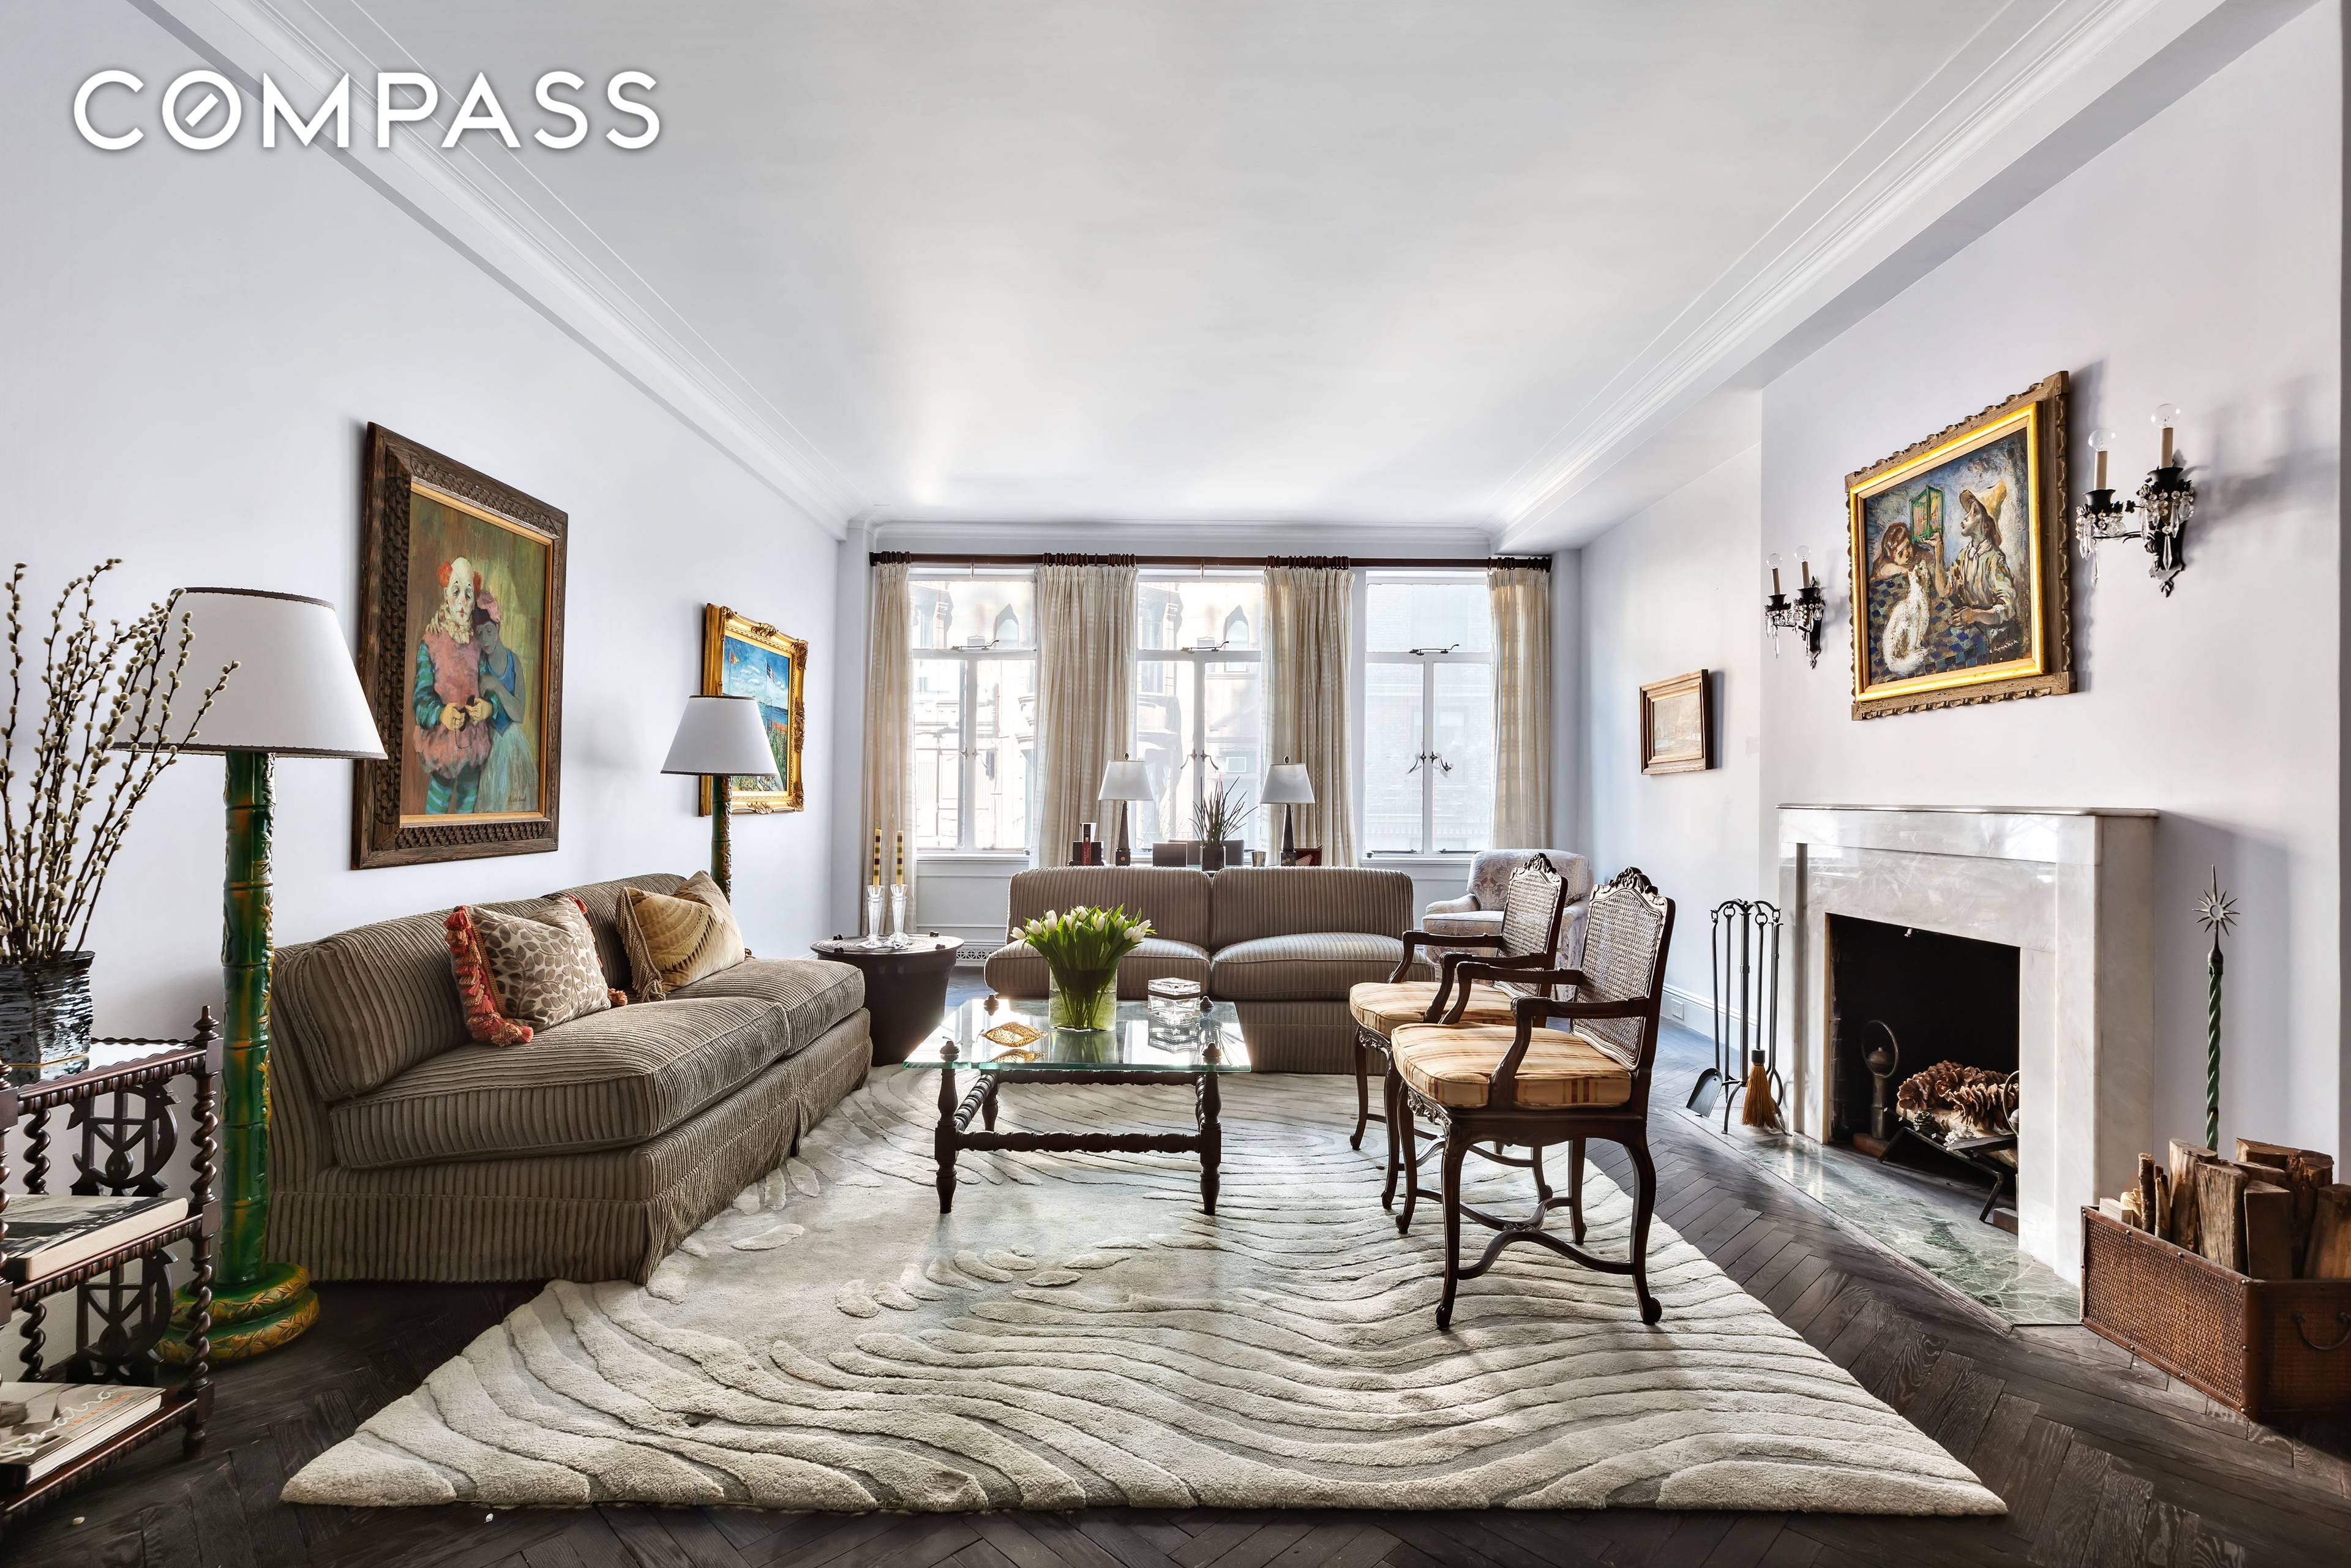 A grand scale 7 room home located at 211 Central Park West, one of the most celebrated cooperatives on Central Park West.